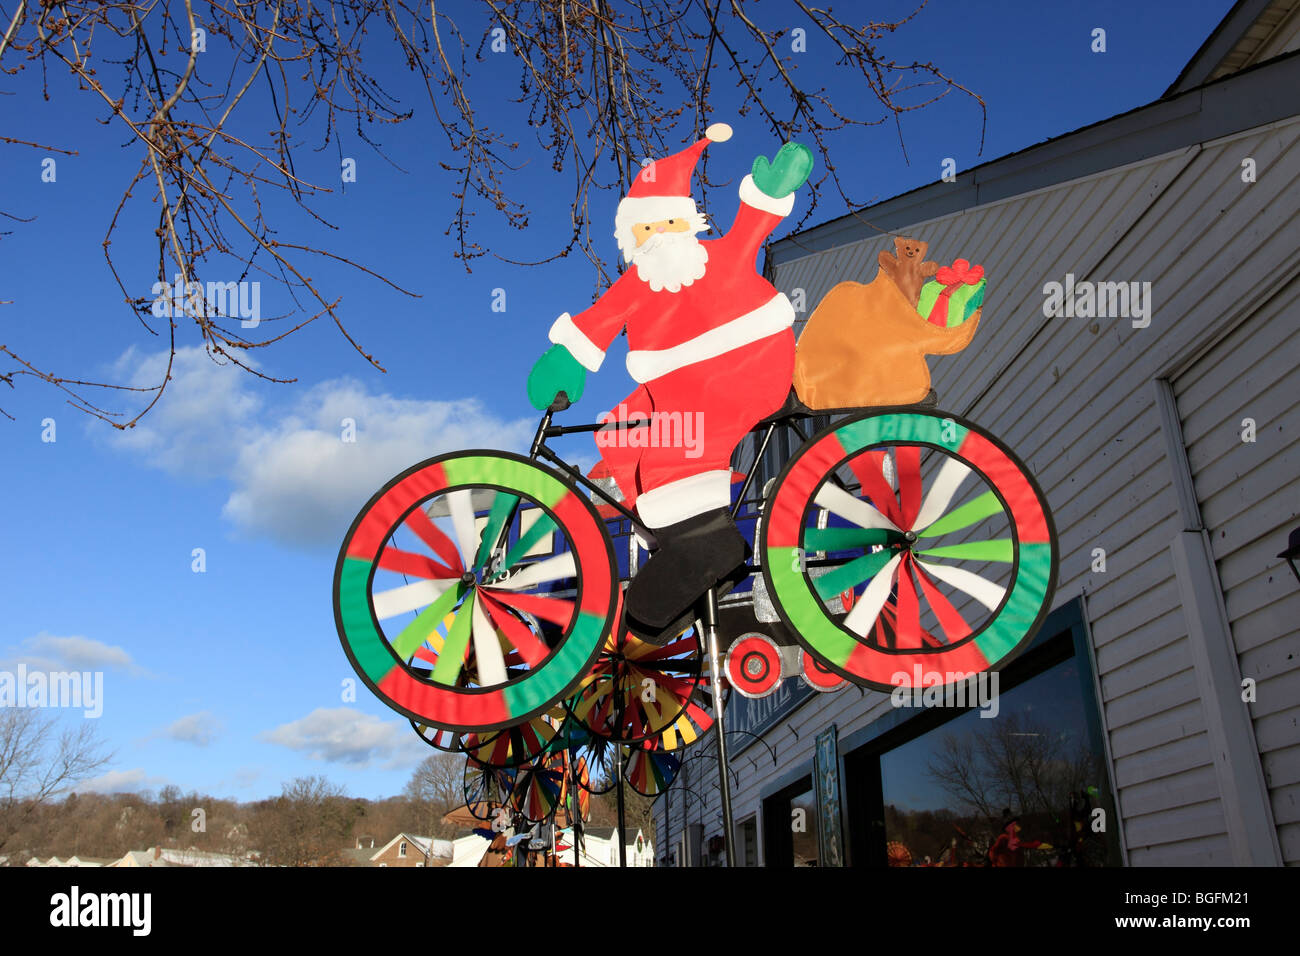 Santa Claus on bicycle lawn ornament, Port Jefferson, Long Island, NY Stock Photo